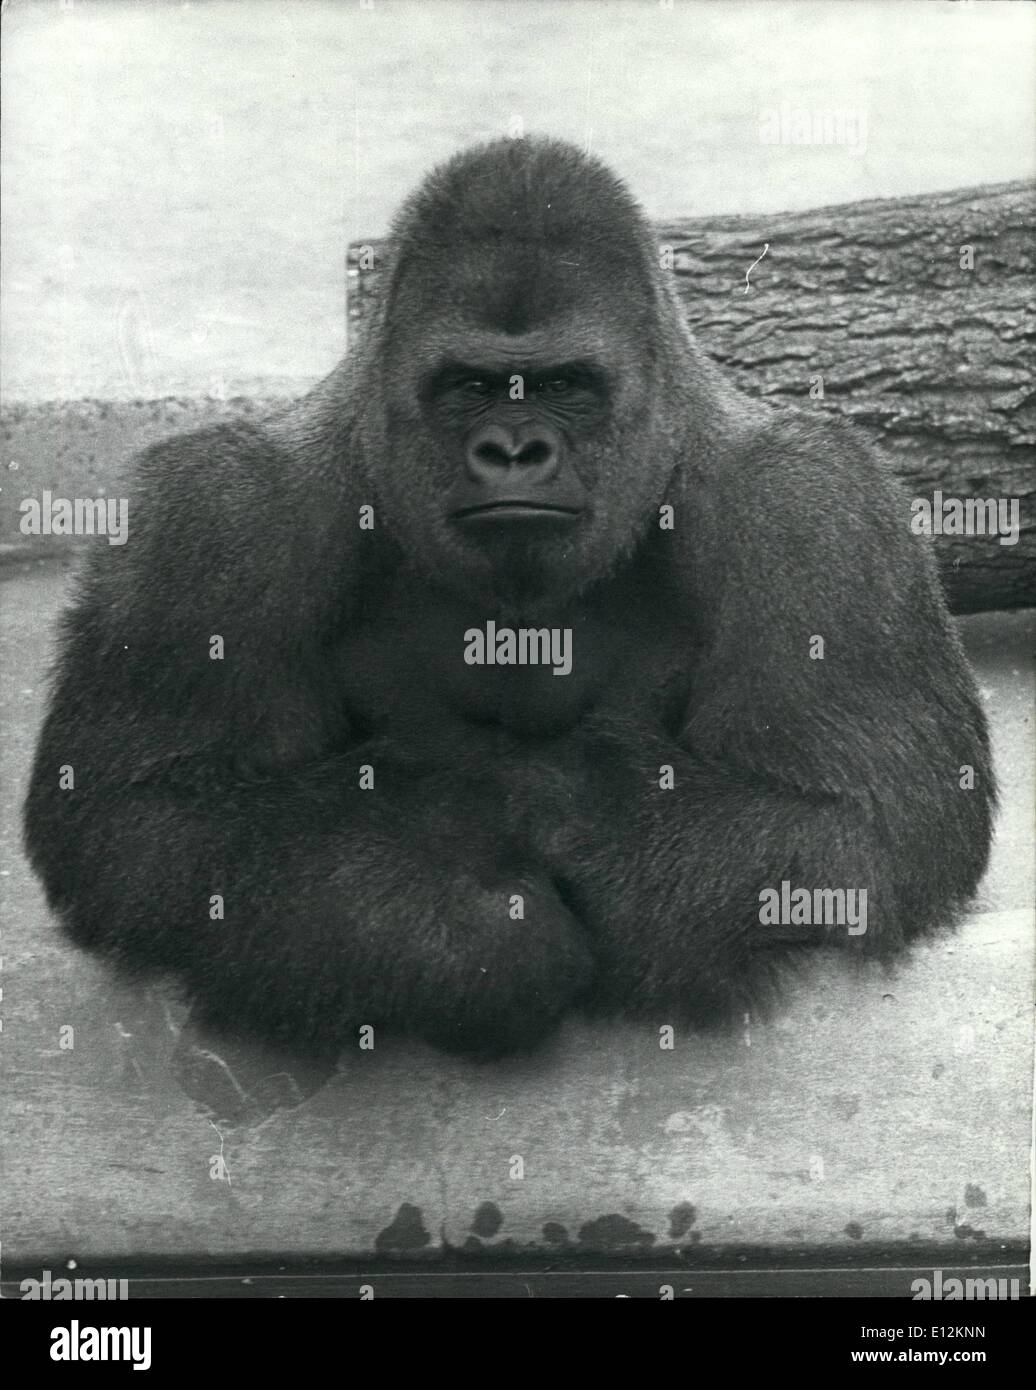 Feb. 24, 2012 - Winter of Discontent; Bukhama, a sixteen year old gorilla in Dudley Zoo in the West Midlands isn't so happy with life. Perhaps its the weather, which together with industrial problems is making Britain a miserable place at the moment. No wonder he looks so gloomy. Stock Photo